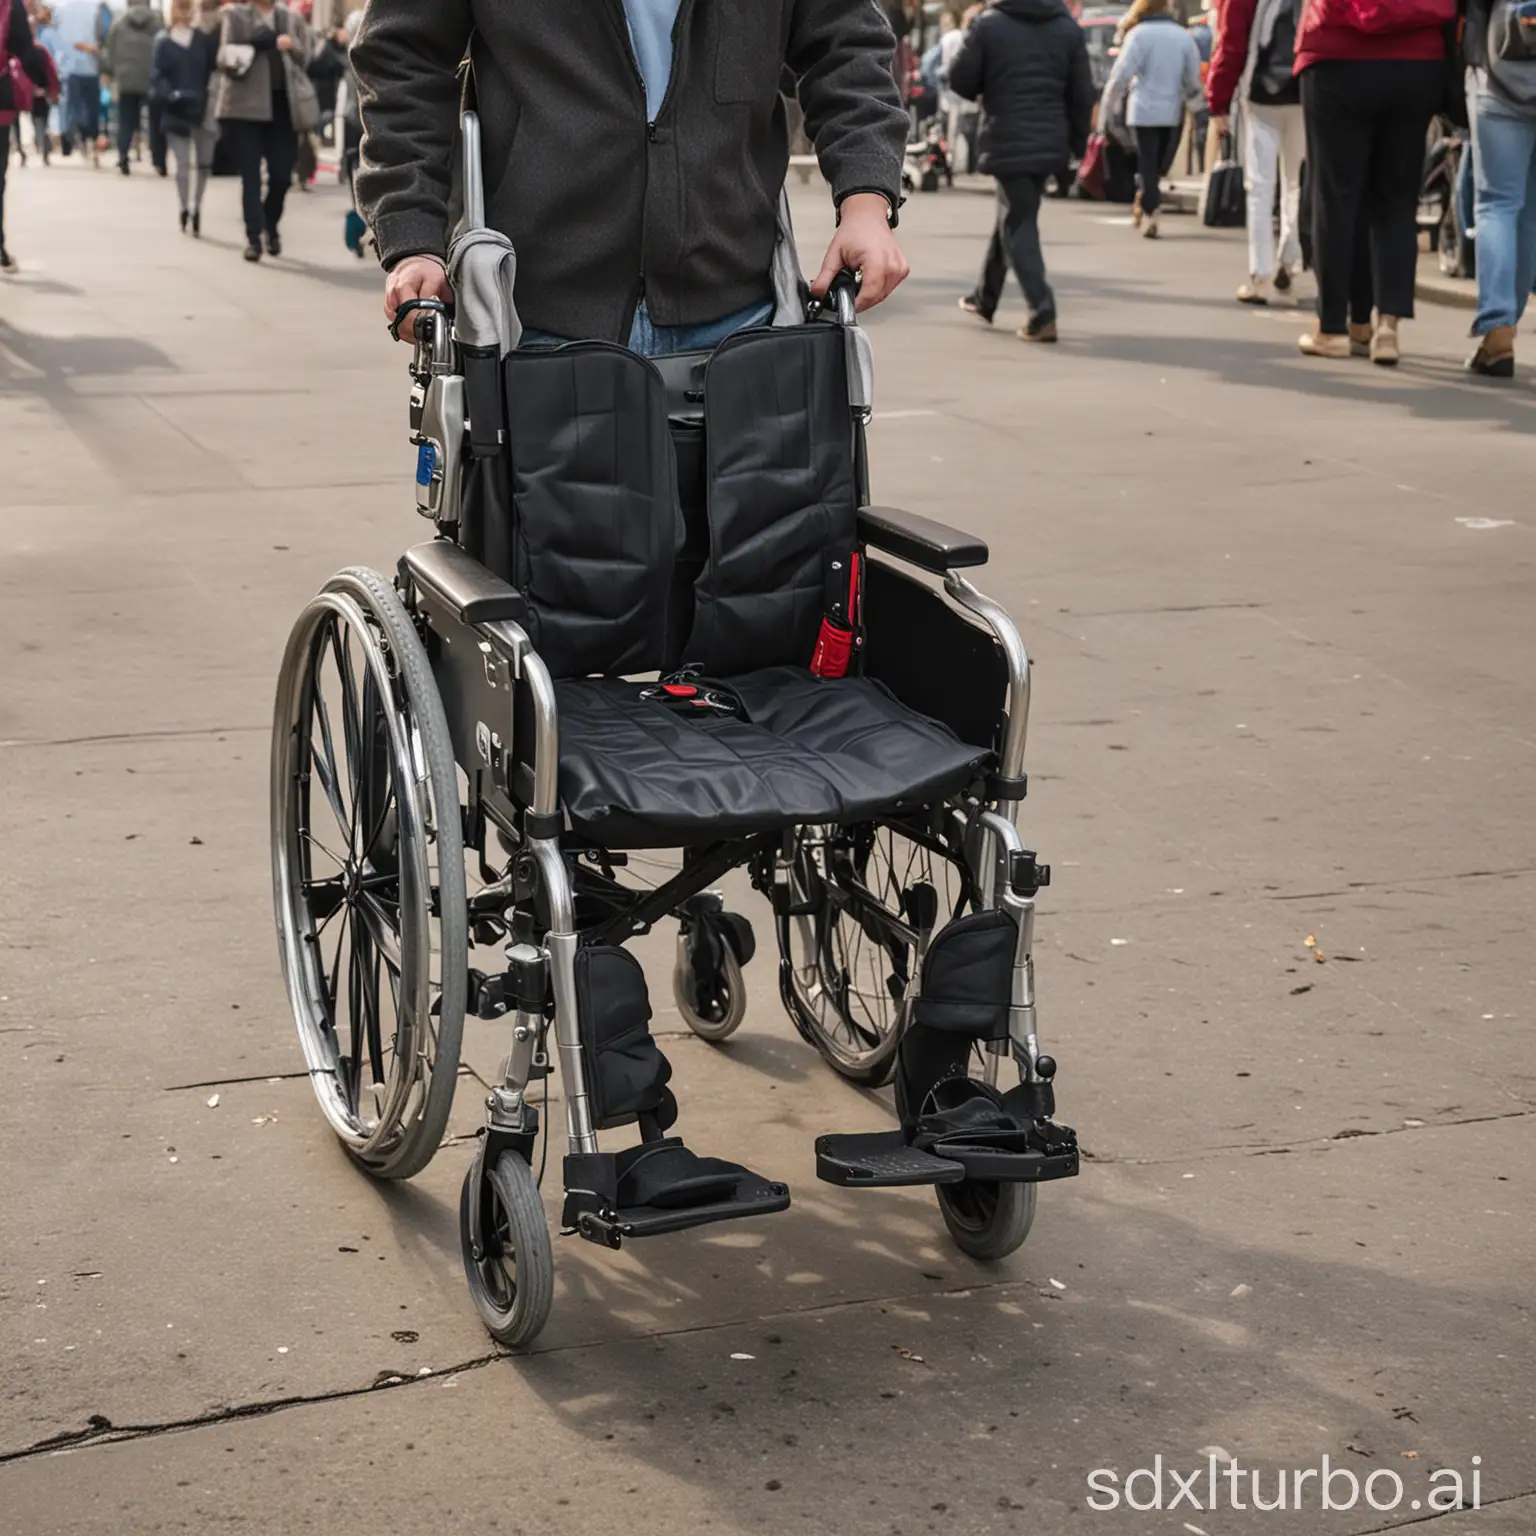 A person using a wheelchair to navigate a crowded sidewalk. The wheelchair is lightweight and easy to maneuver, allowing the person to get around with ease.